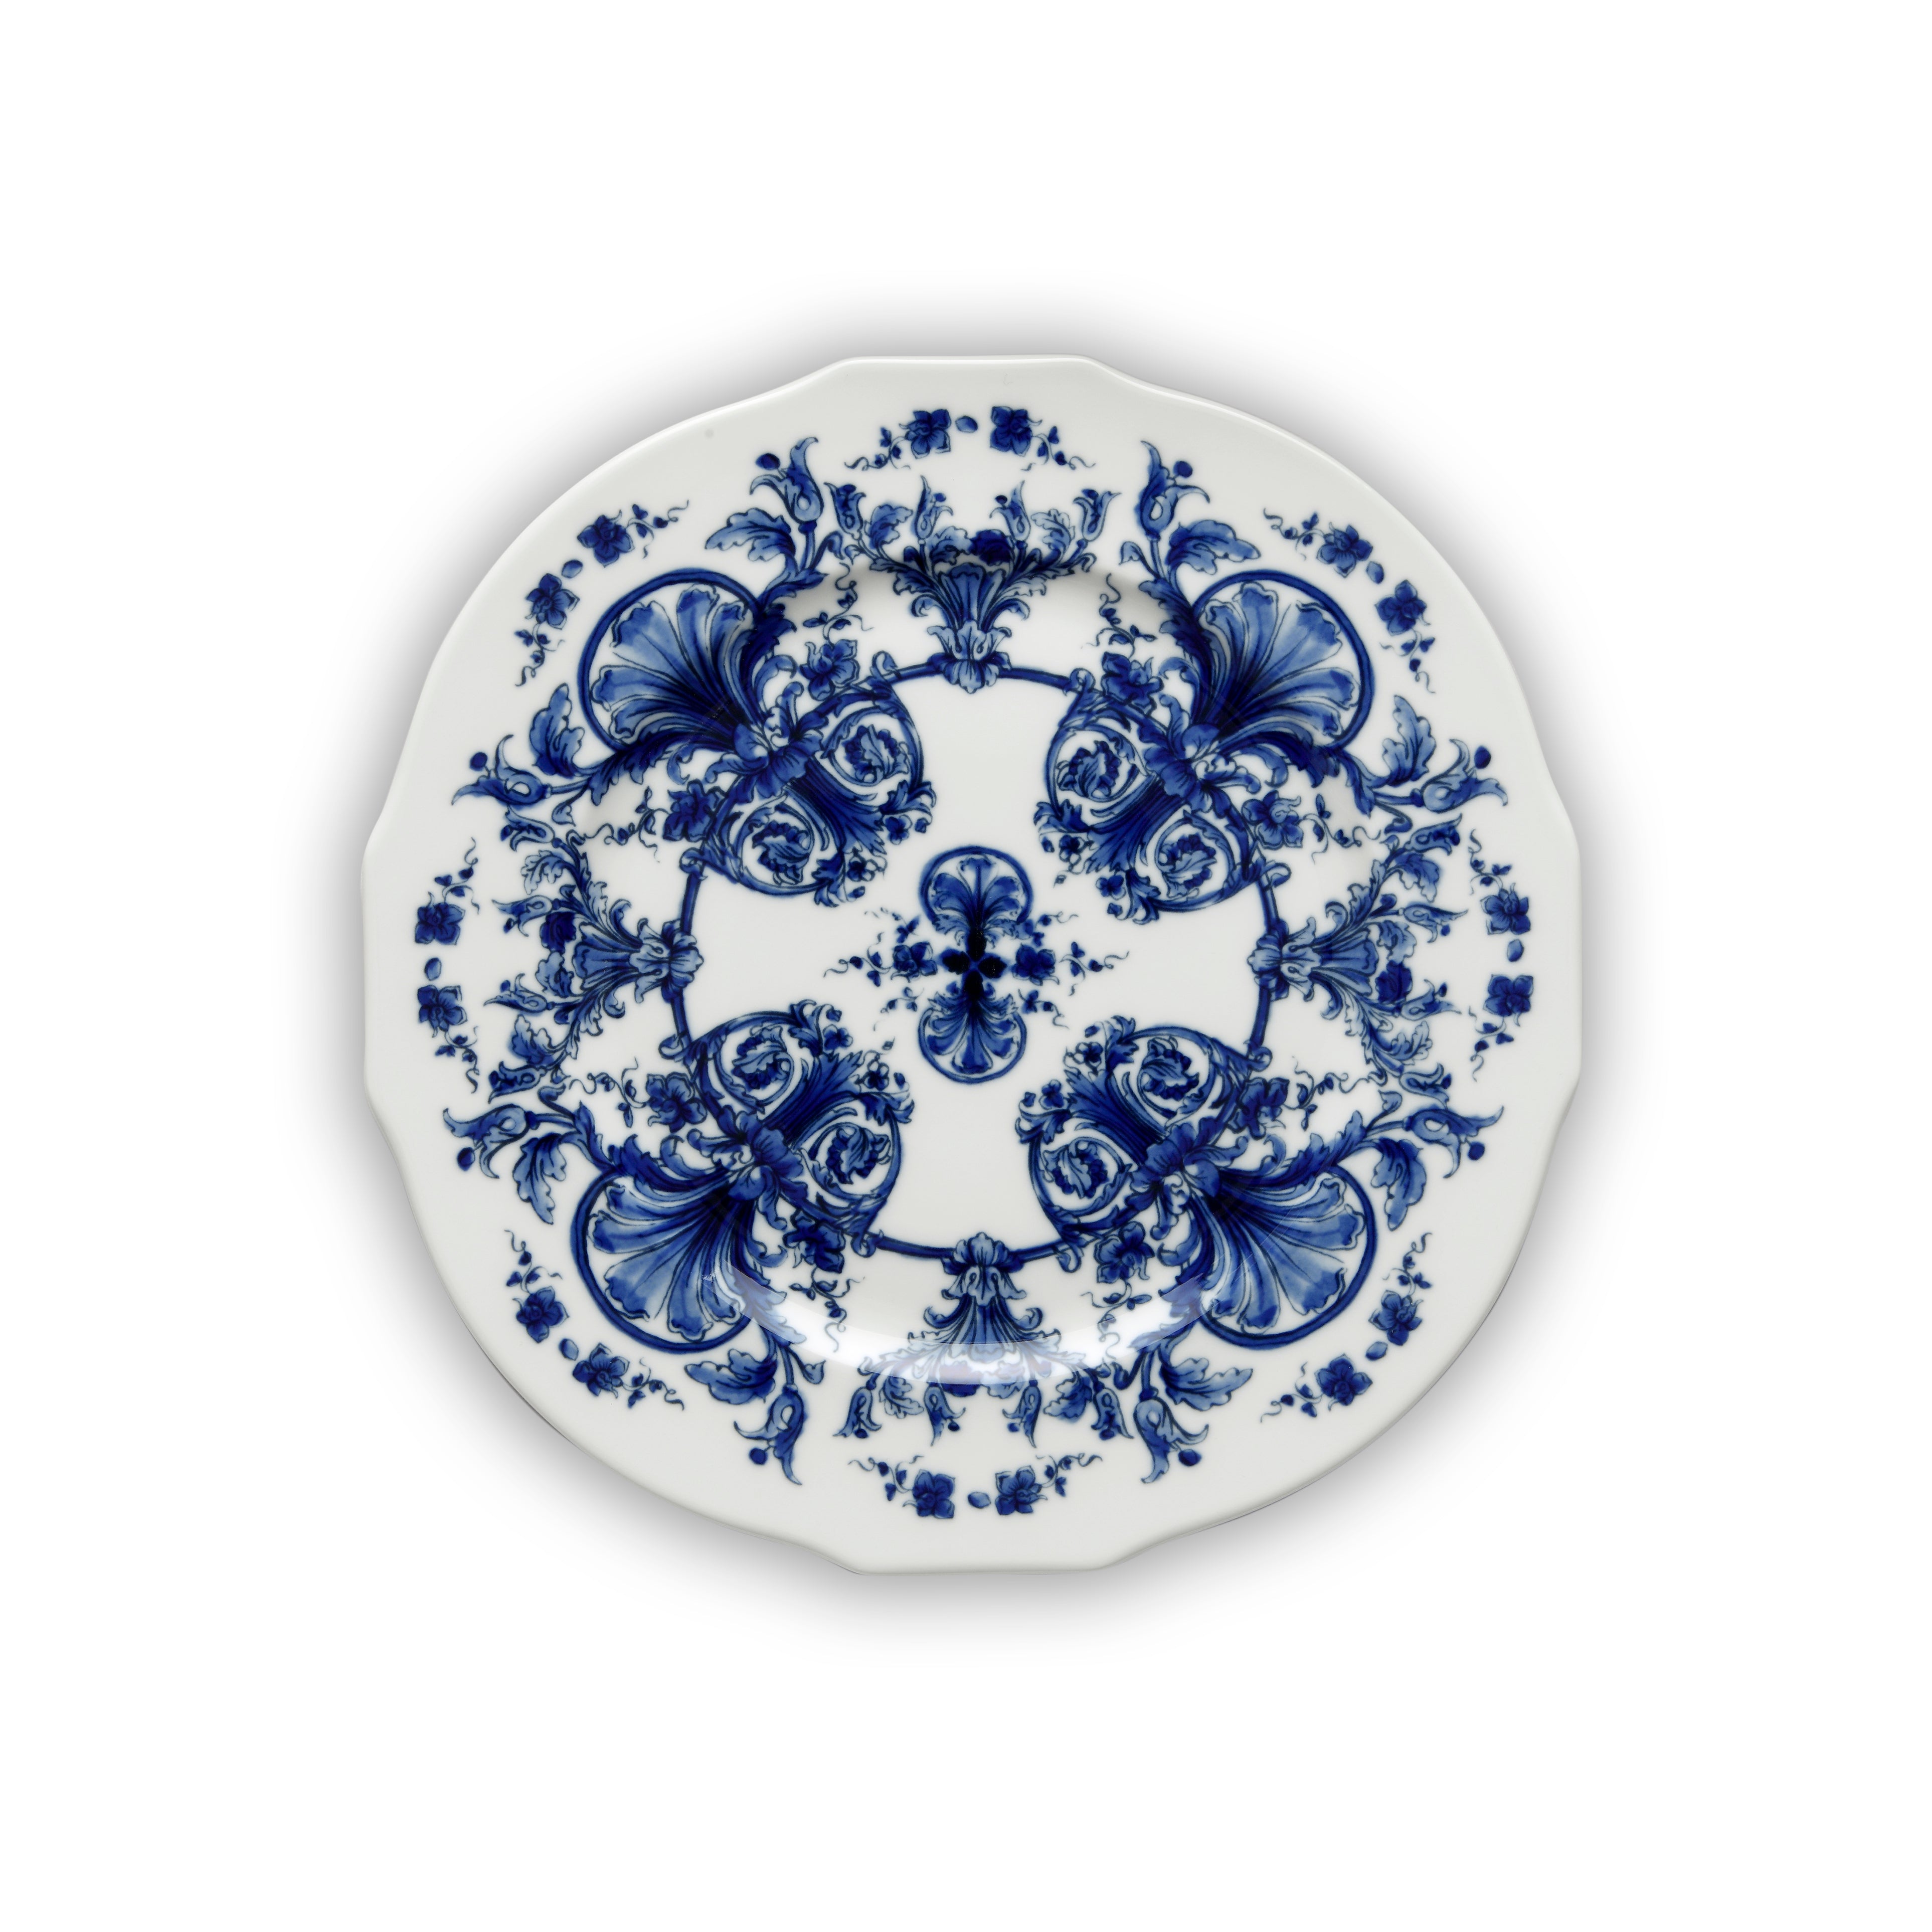 Duchessa Charger Plate in Babele Blu, 31cm